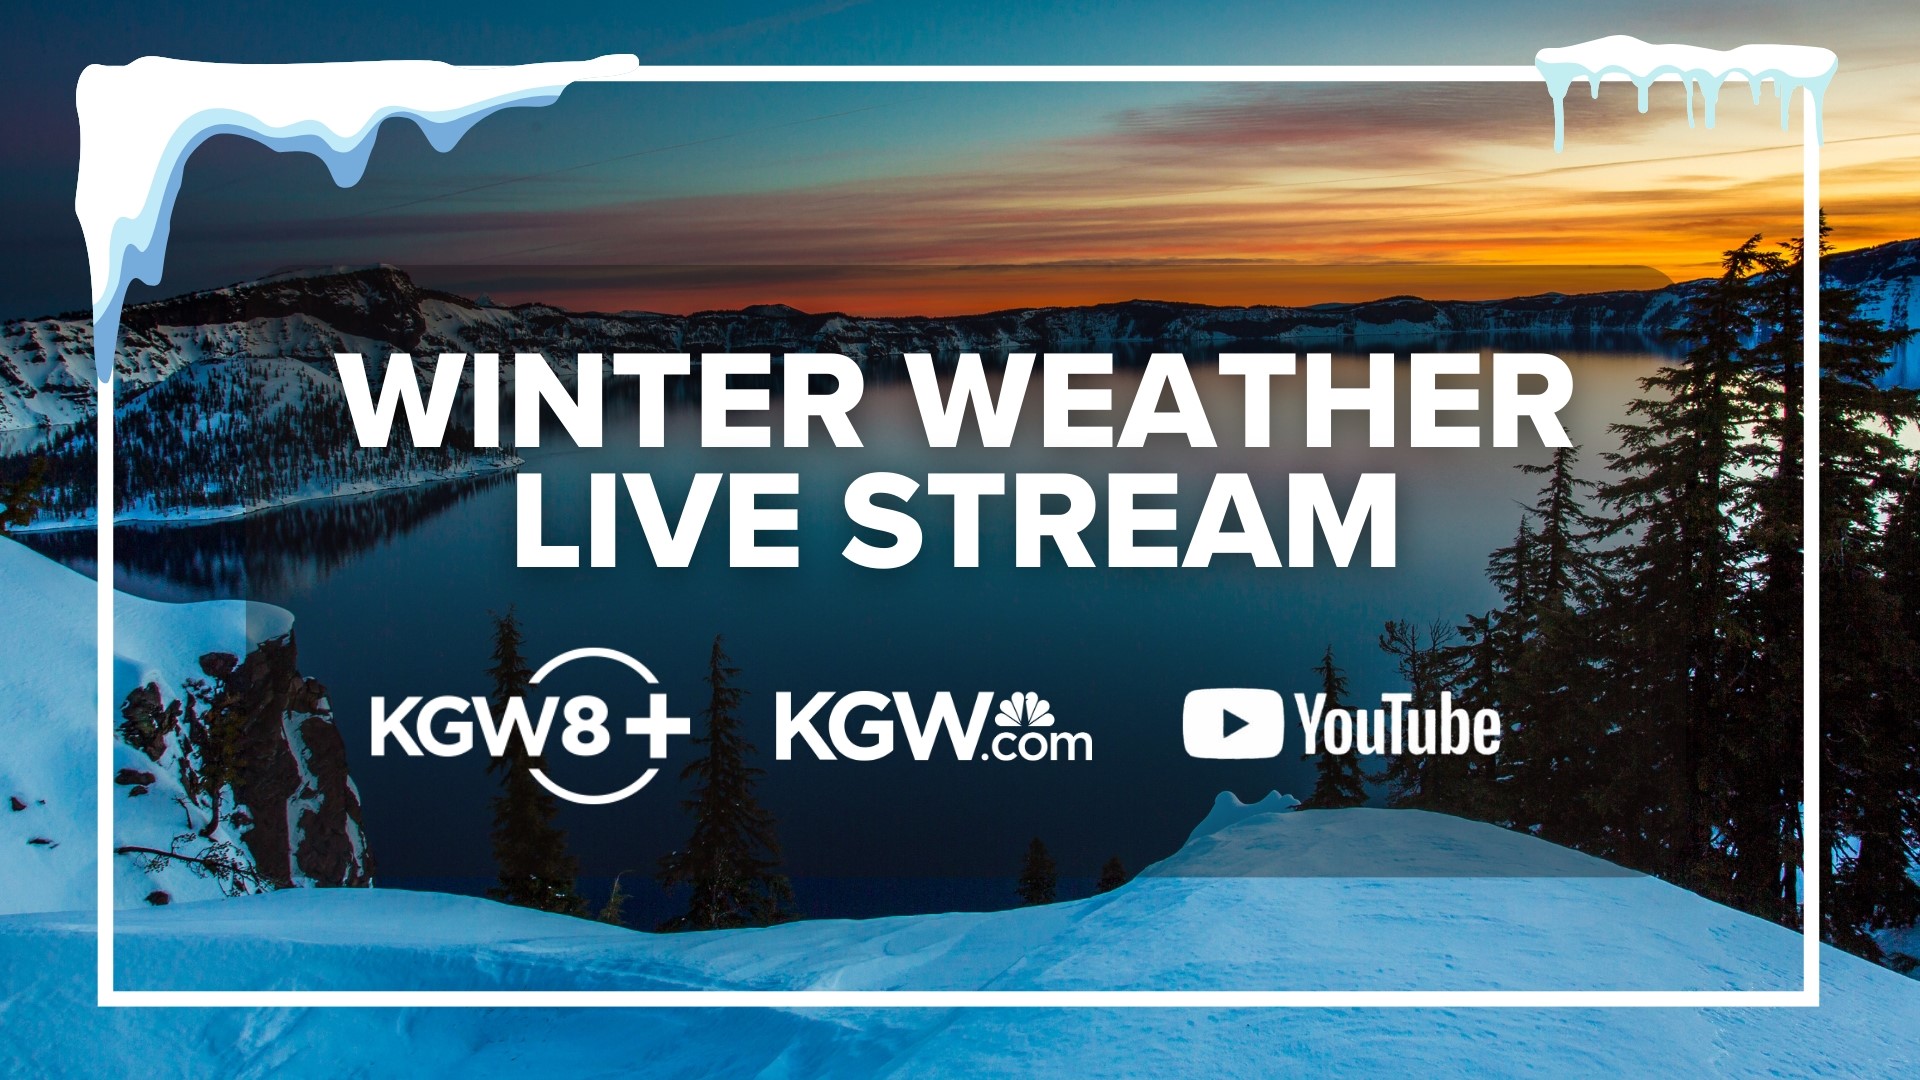 A winter weather advisory in the Portland metro area forecasts more freezing rain. KGW's Rod Hill and Chris McGinness discuss what to expect.